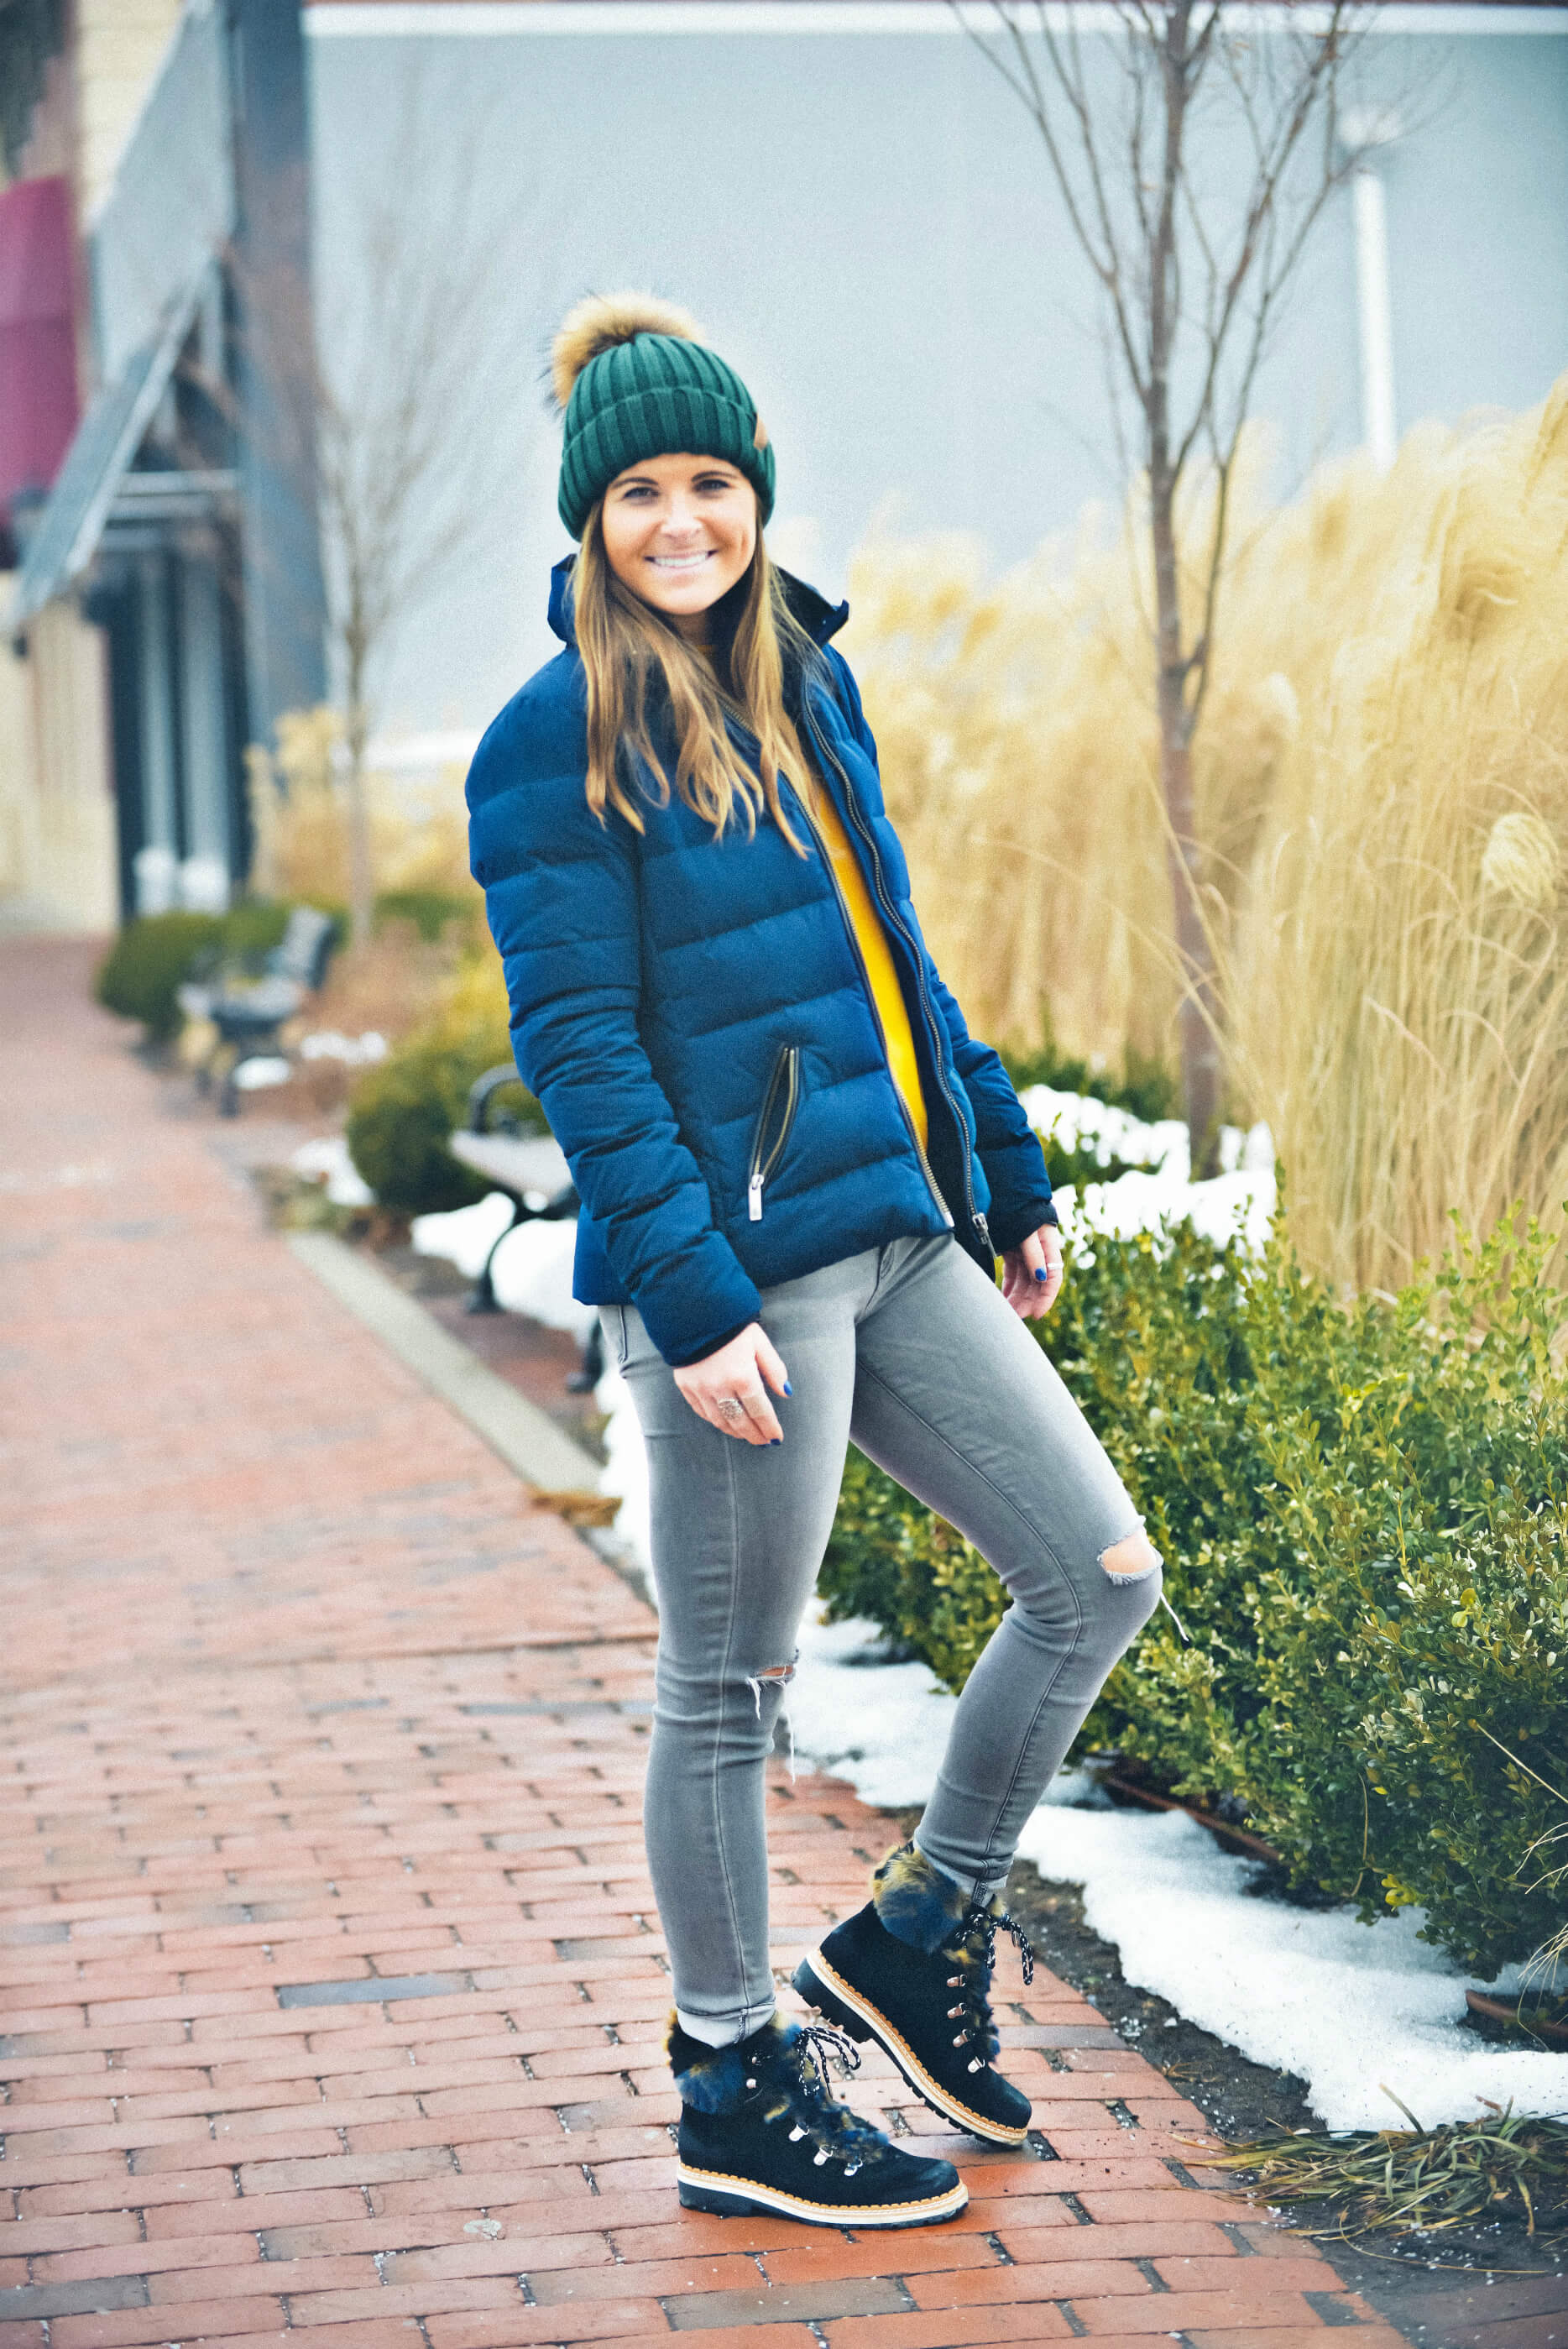 Green Pom Knit Beanie, Blue Puffer Coat, Winter Style, Sam Edelman Bronte Combat Boots, Tilden of To Be Bright